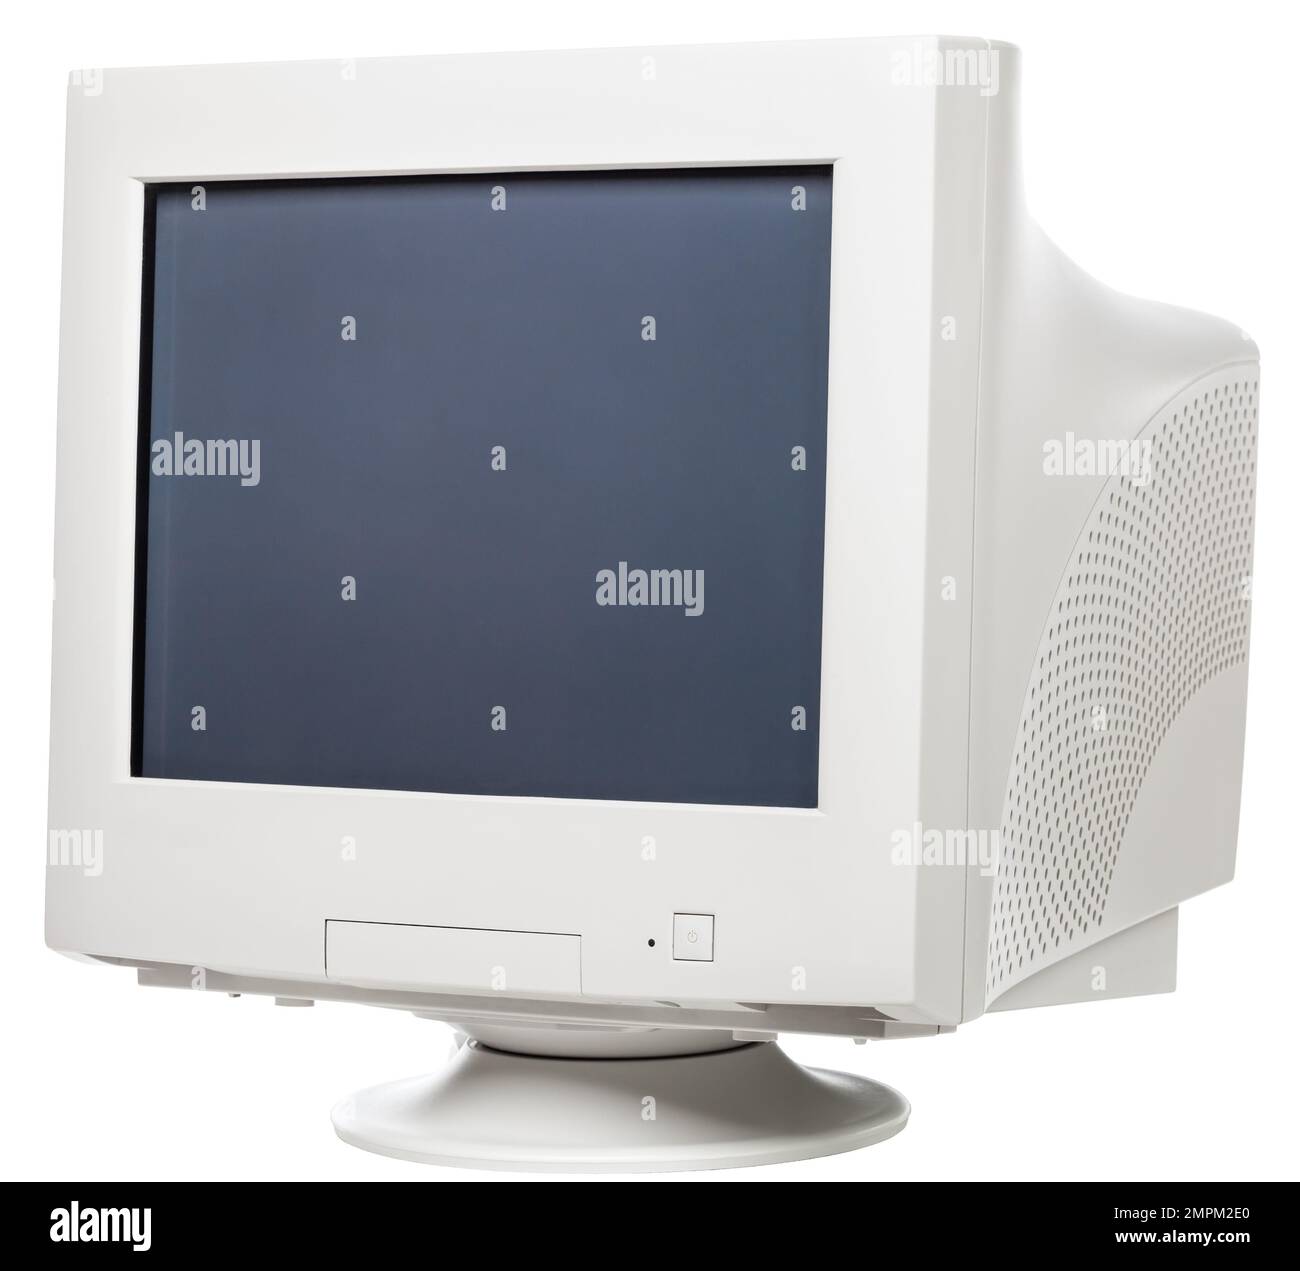 Obsolete CRT computer monitor isolated on white background Stock Photo